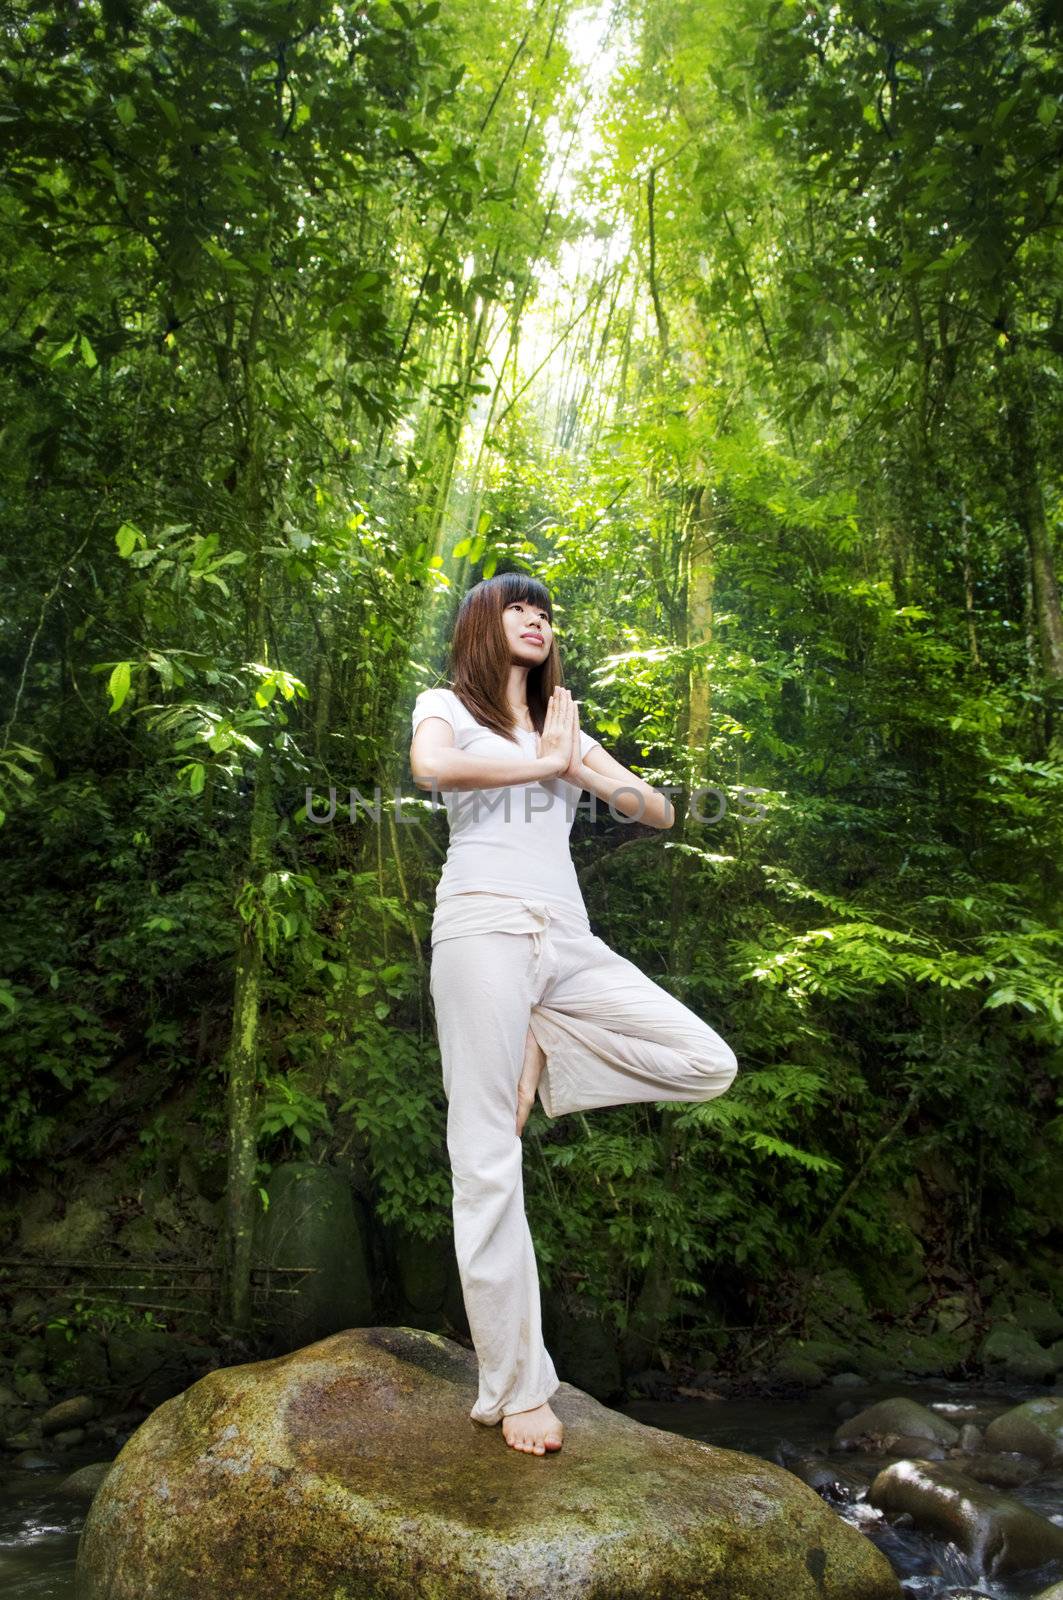 Female meditating in tropical rainforest, standing on a boulder.